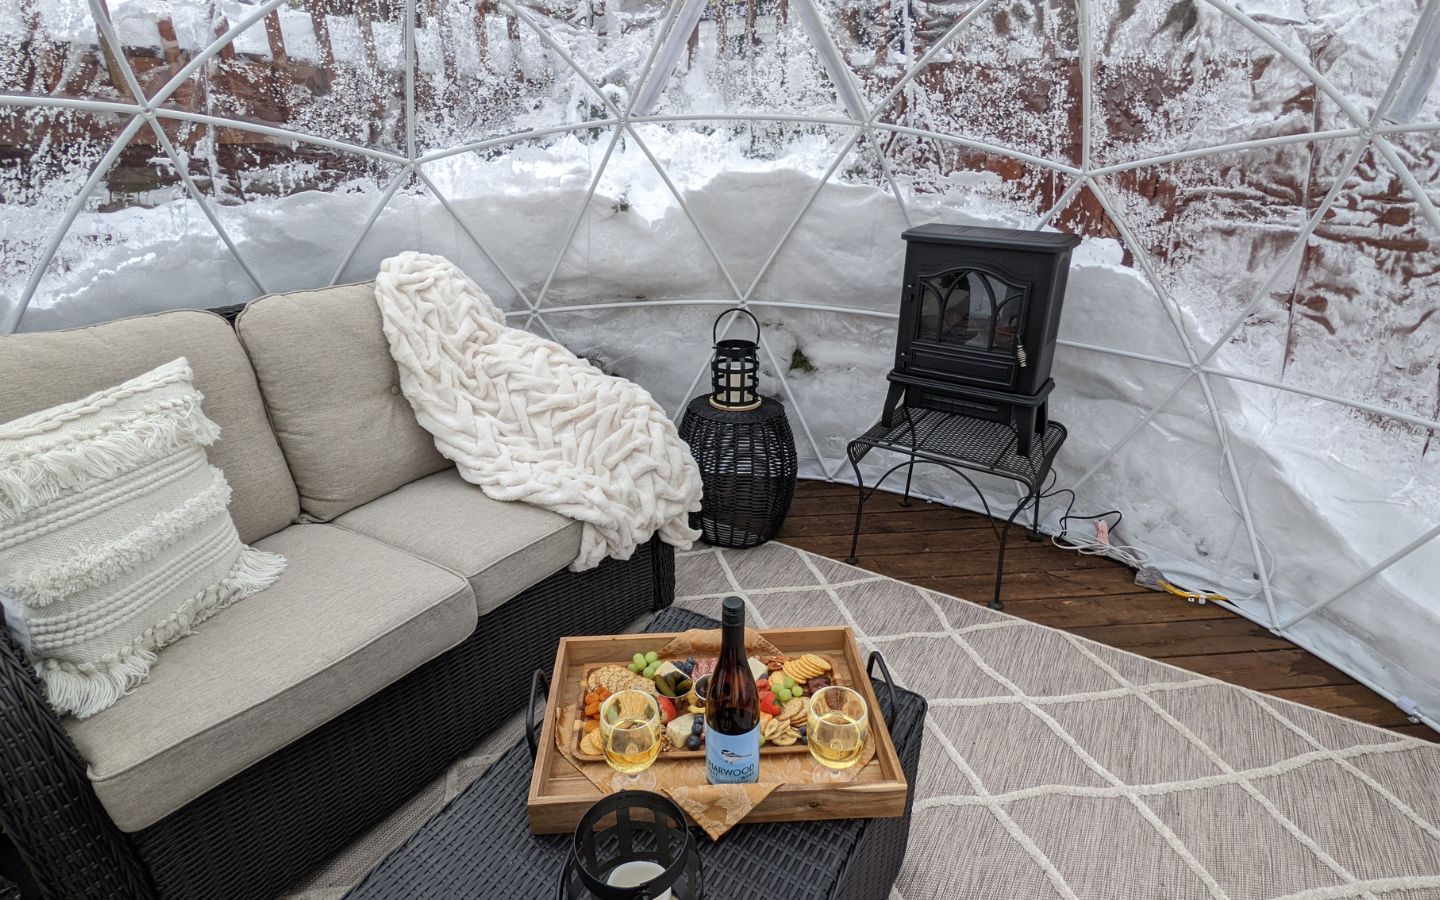 ozy loveseat, fire stove, charcuterie board and wine in the outdoor igloo during the winter.